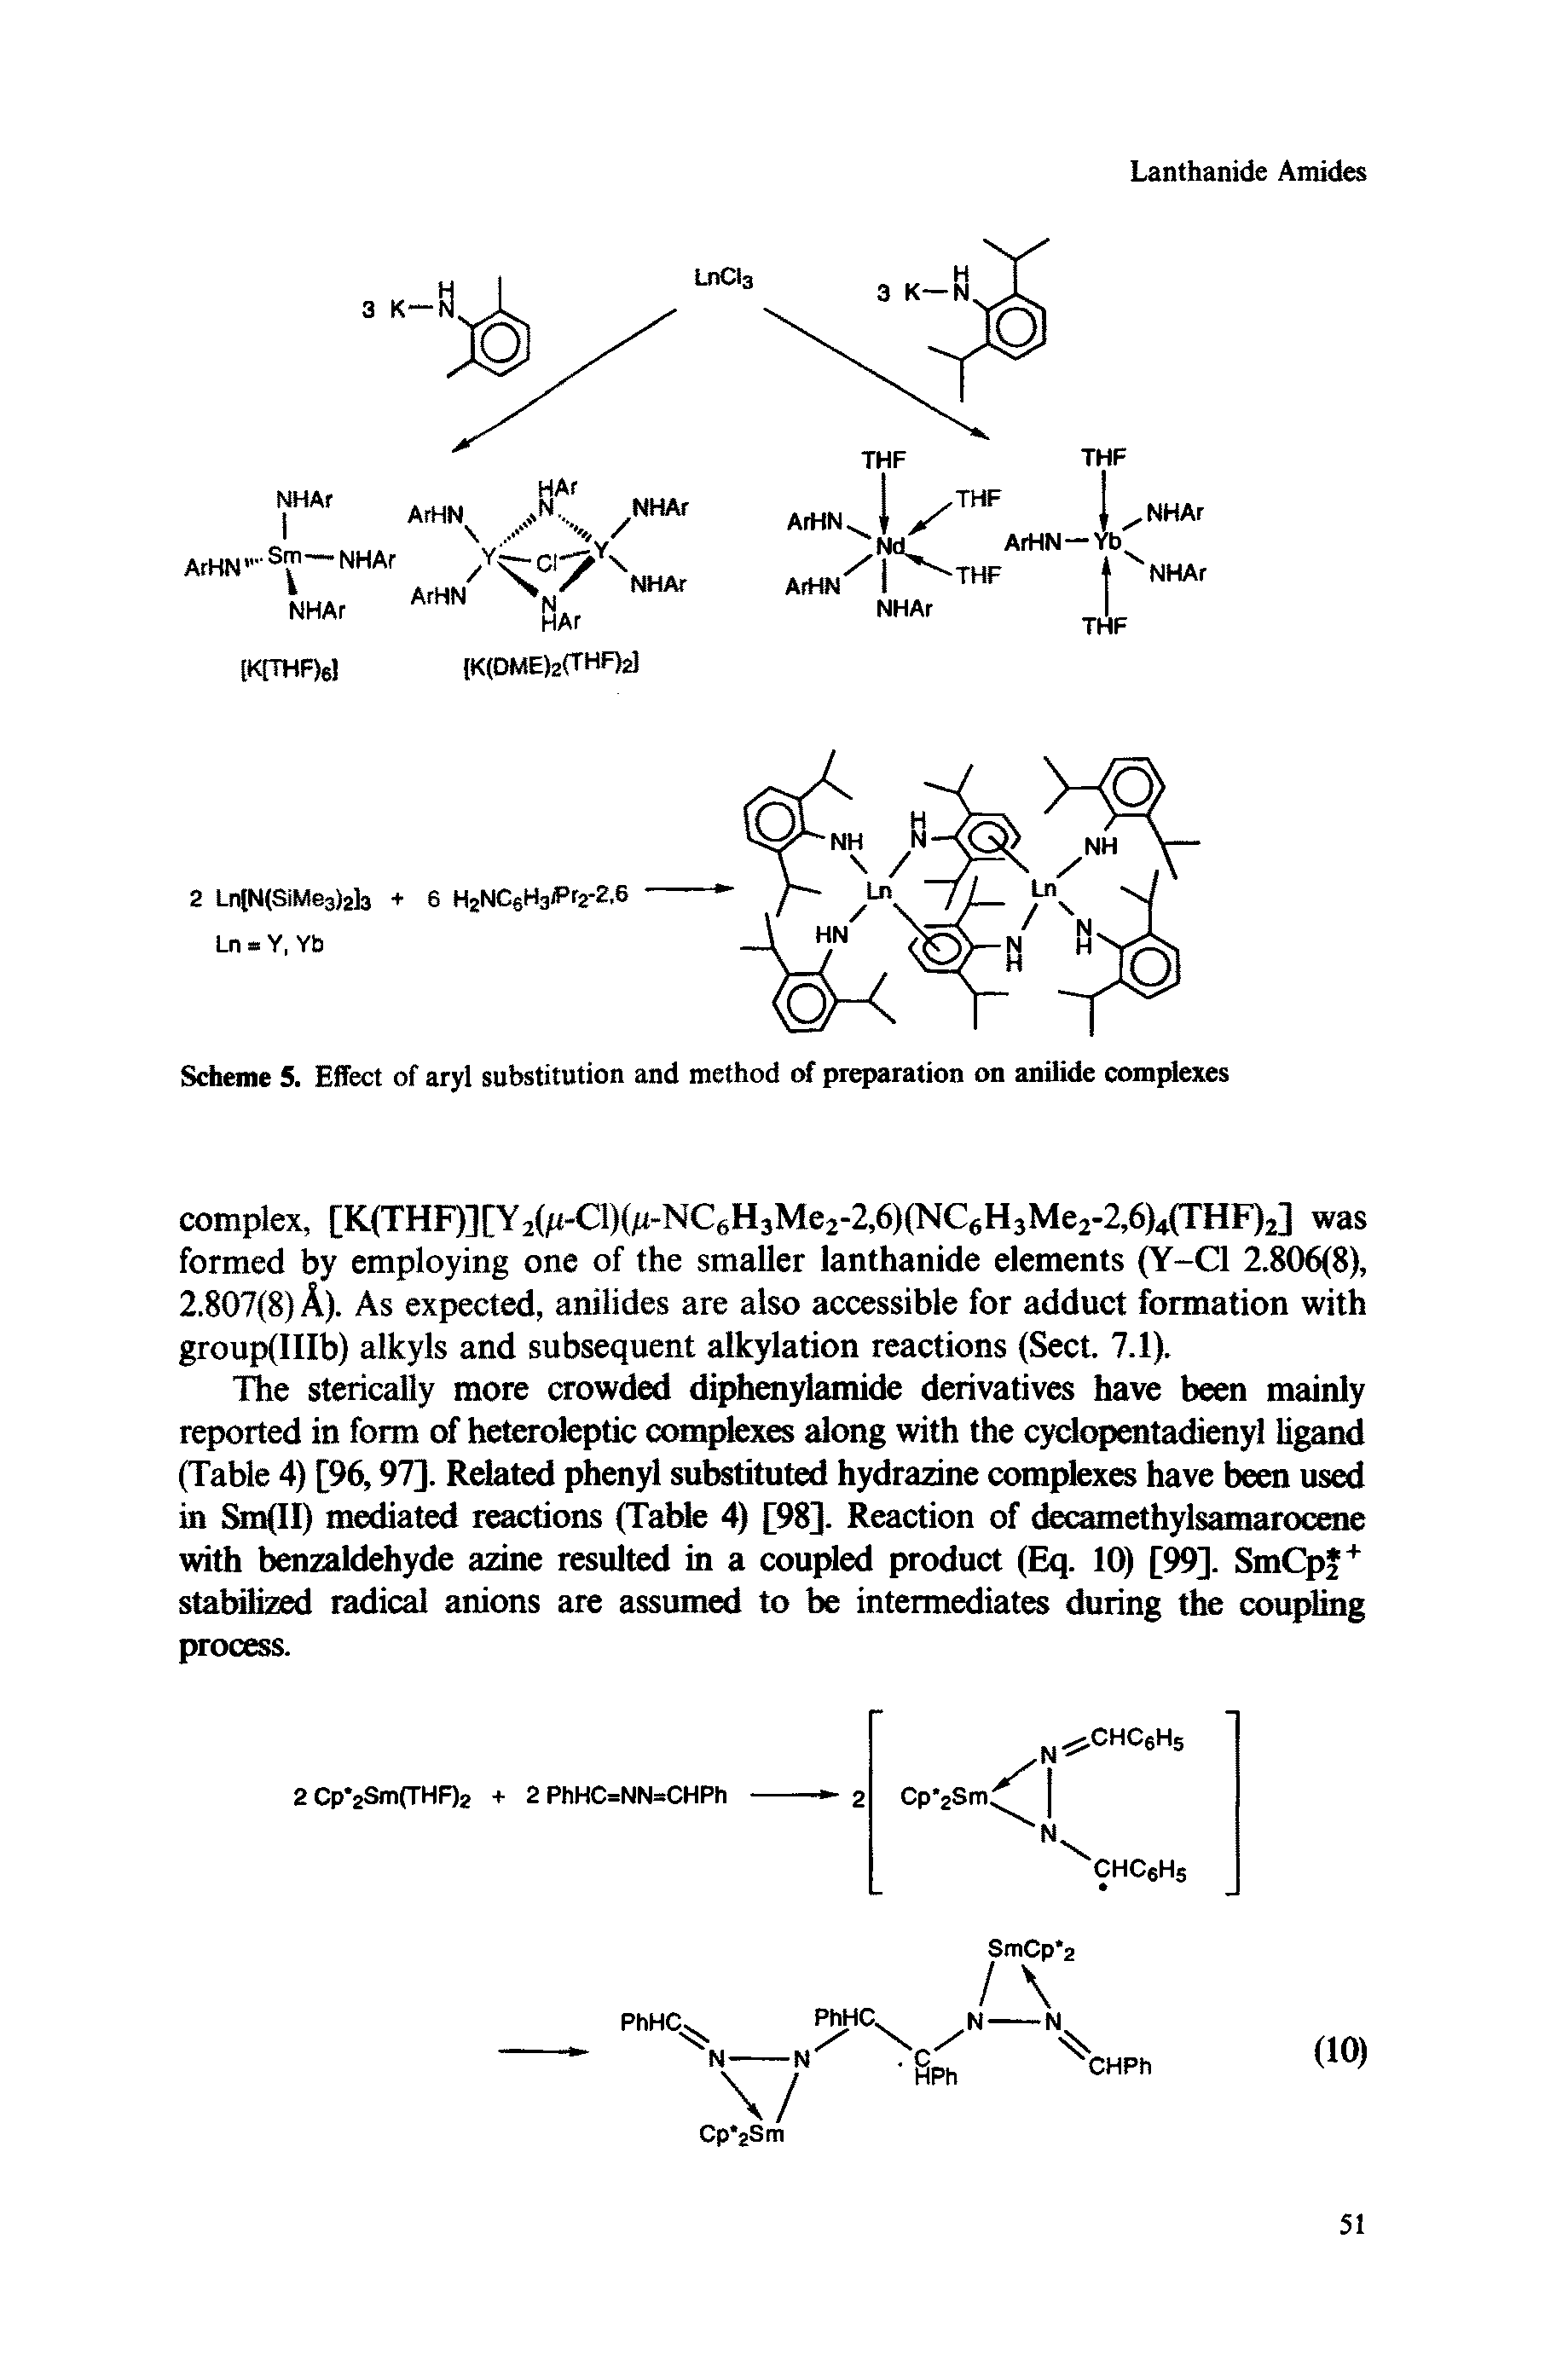 Scheme 5. Effect of aryl substitution and method of preparation on anilide complexes...